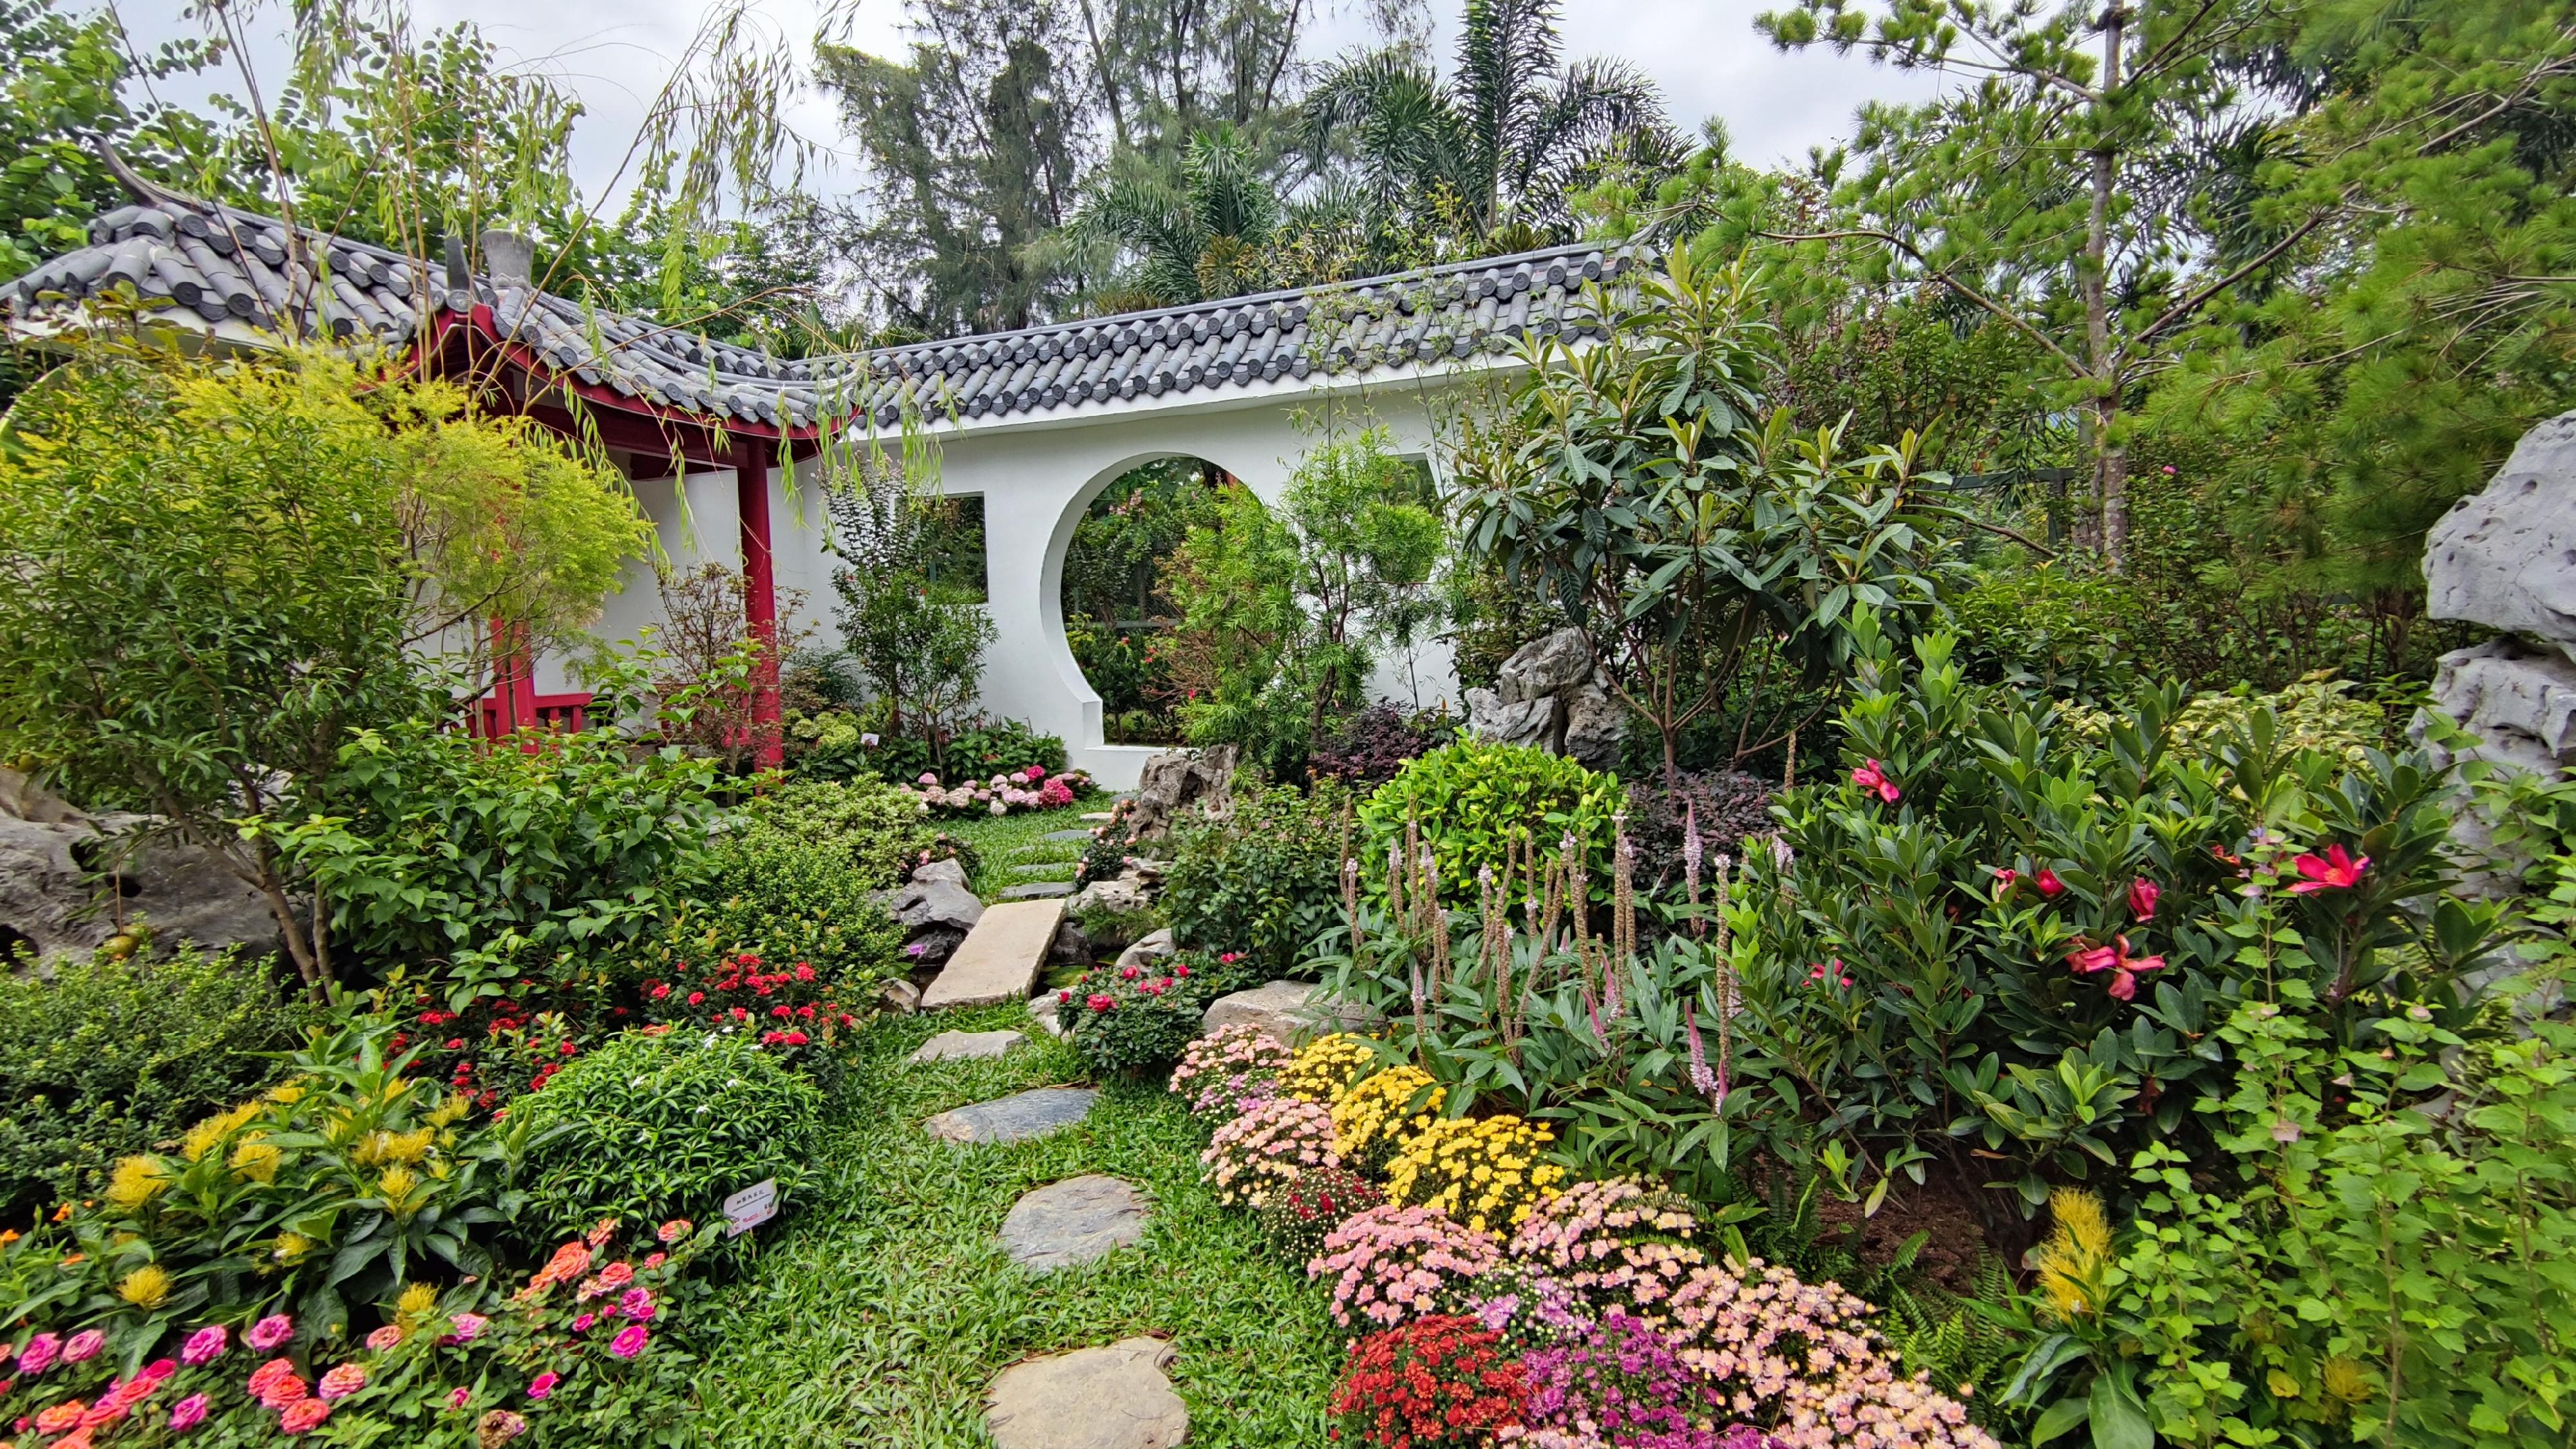 The Leisure and Cultural Services Department today (September 9) implemented phase three of the Blossom Around Town programme. Themed garden plots with Oriental and Western styles will be set up at designated parks in the 18 districts for public appreciation. Photo shows an Oriental style themed garden plot, "Flowers in Bloom．Resonance", at Kowloon Tsai Park.
